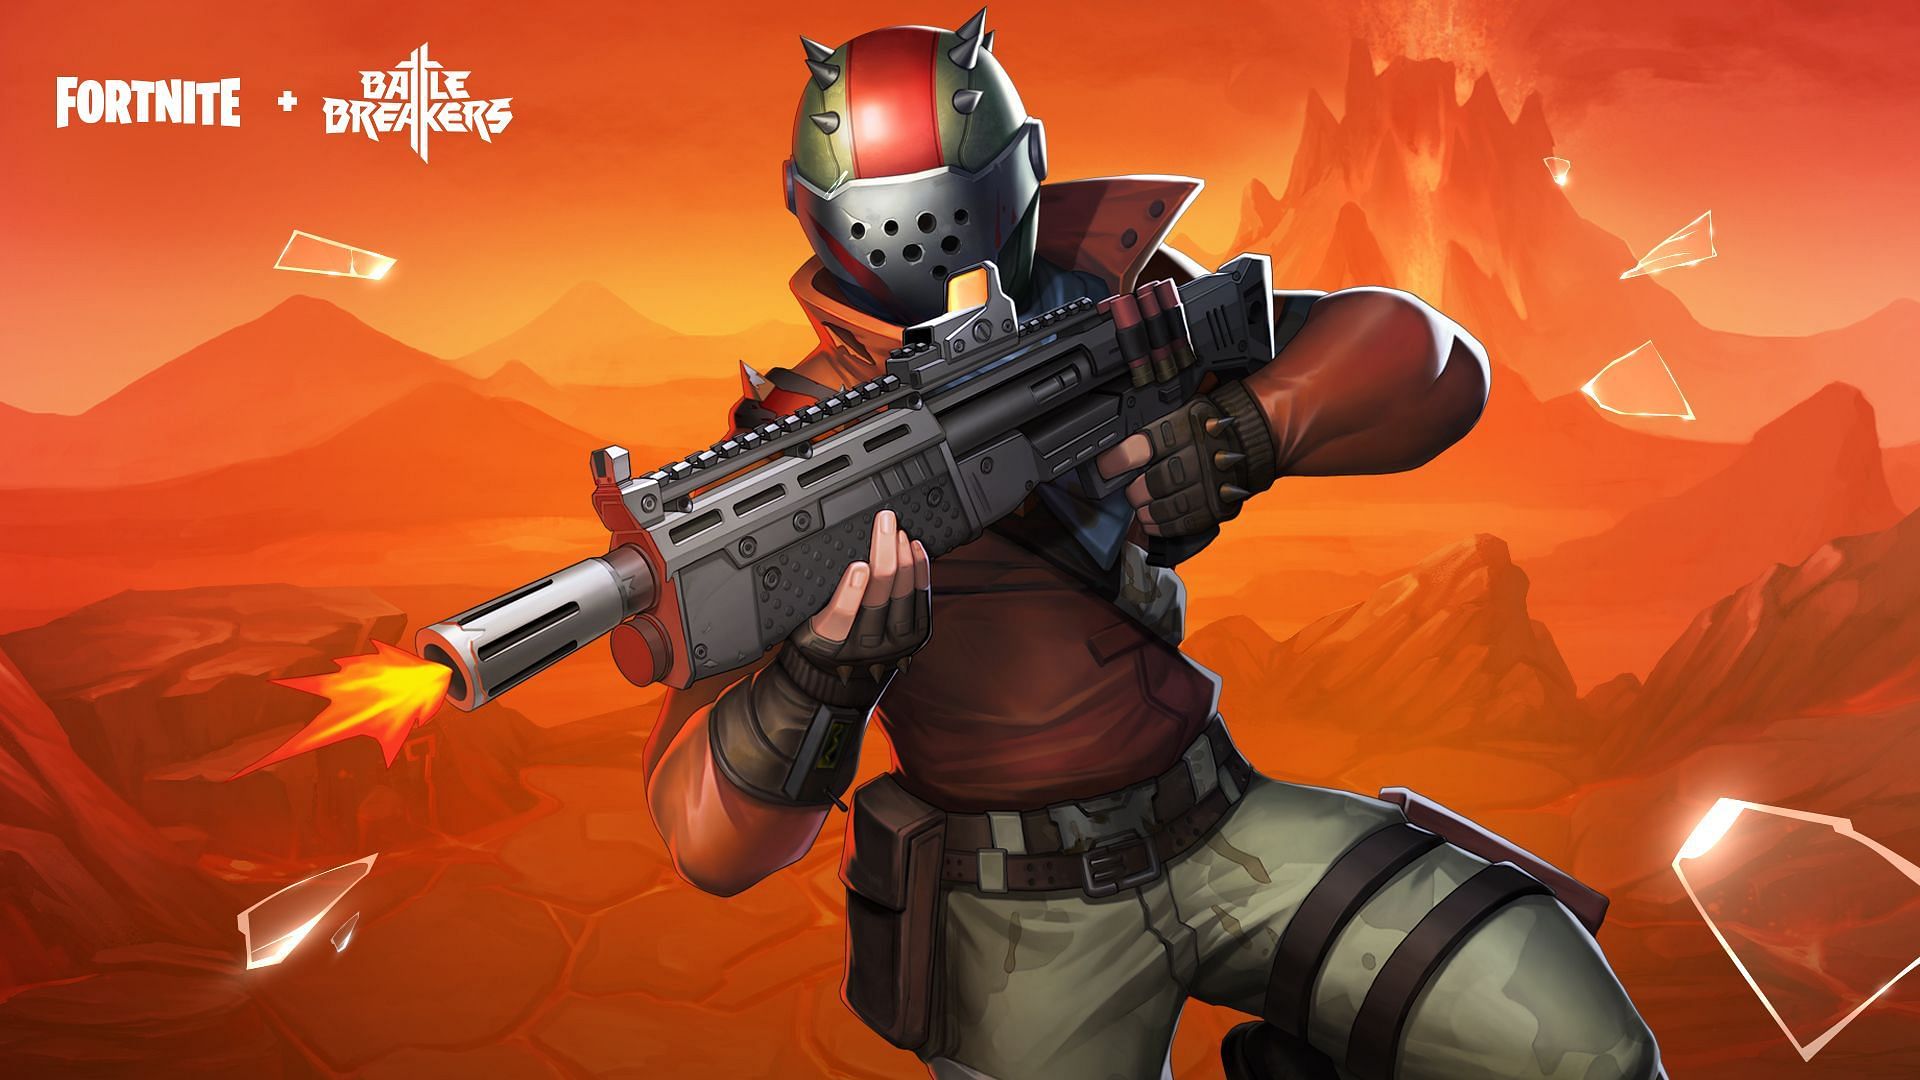 Rust Lord is back in Fortnite for the ending of Season 8 (Image via Epic Games)